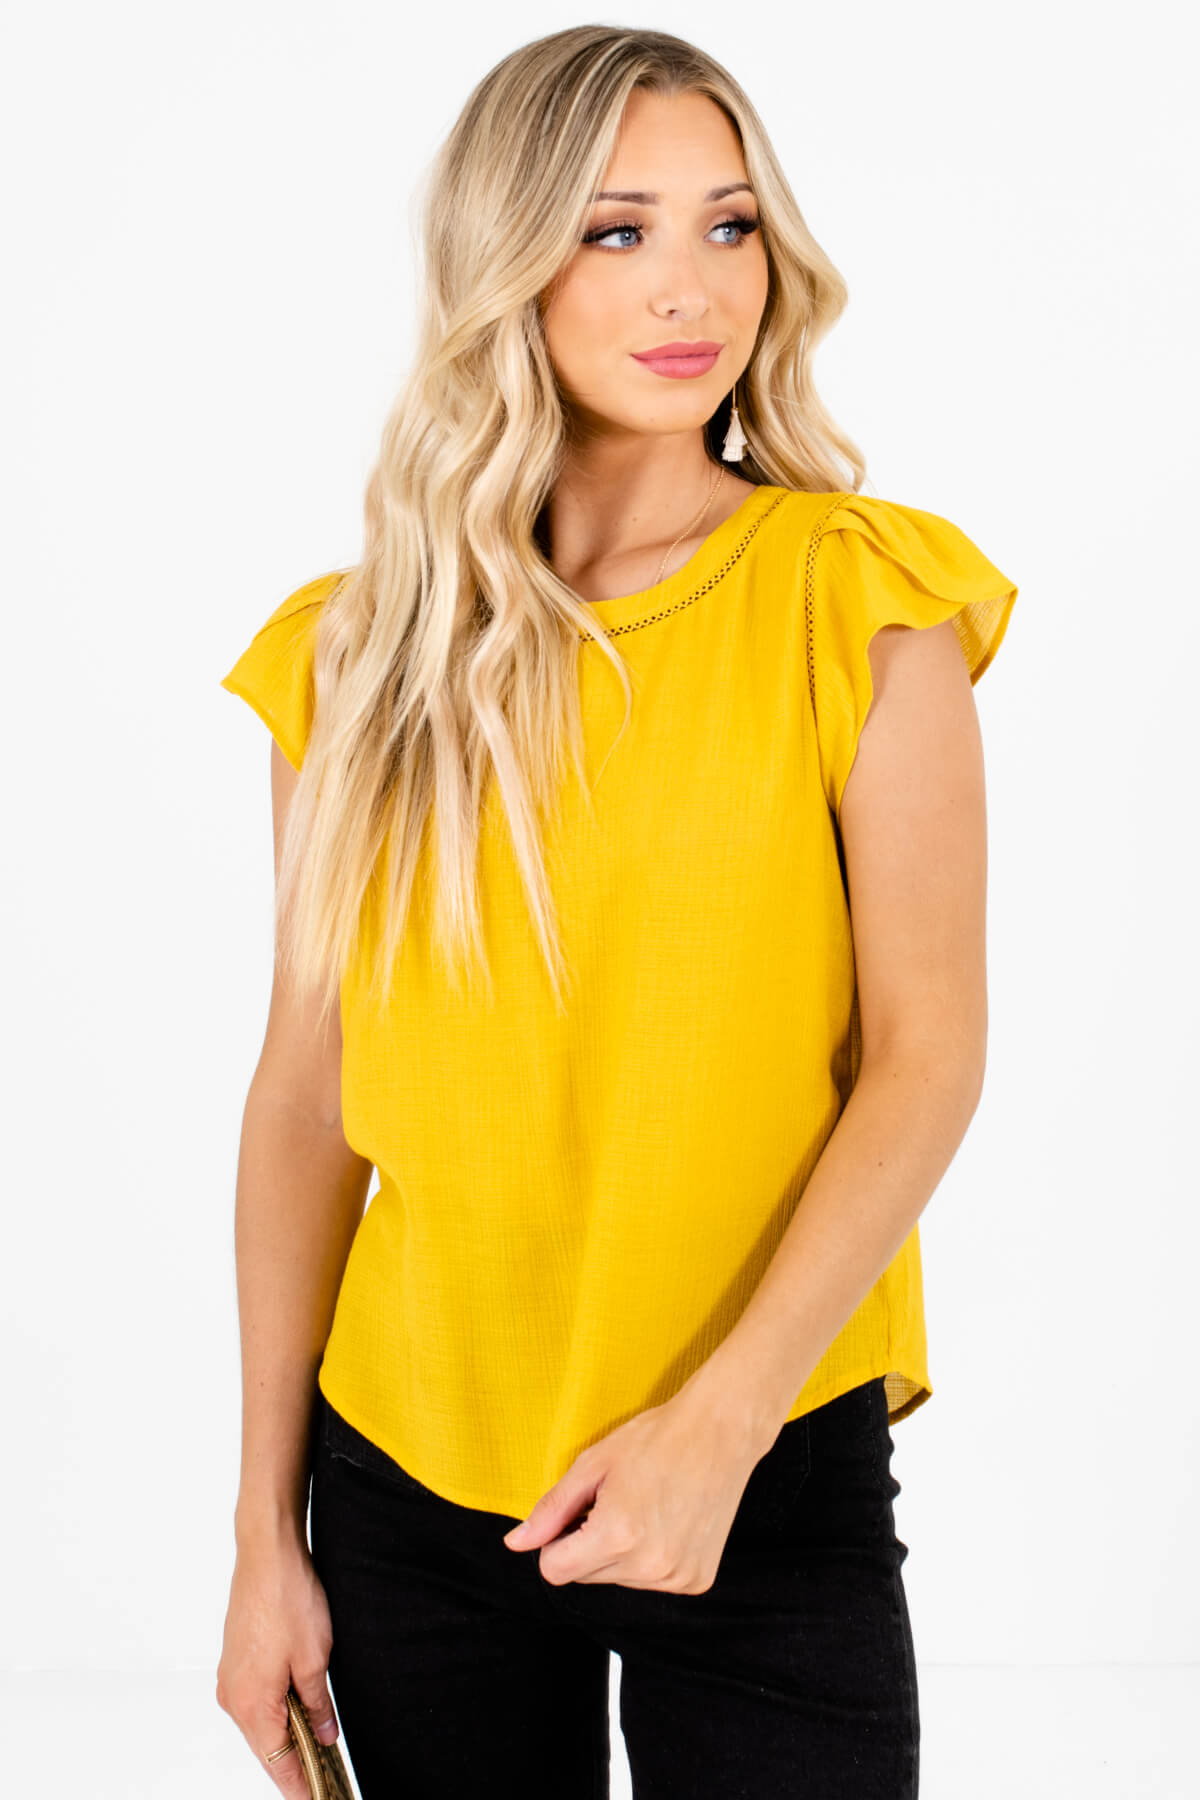 Women’s Mustard Yellow Business Casual Boutique Blouse